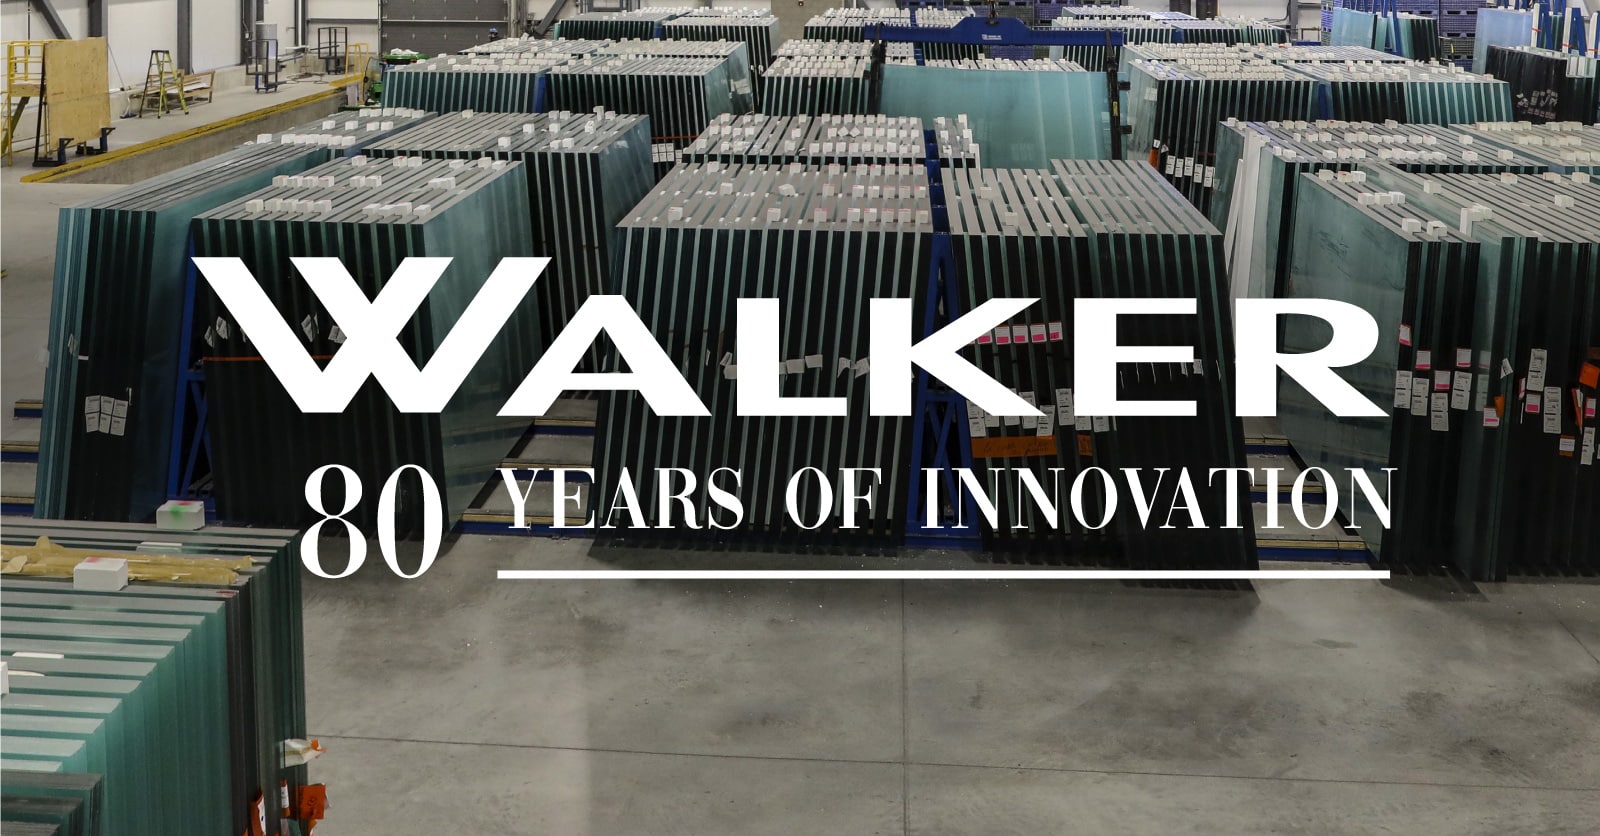 Walker then and now: Eighty years of innovation, through the lens of design